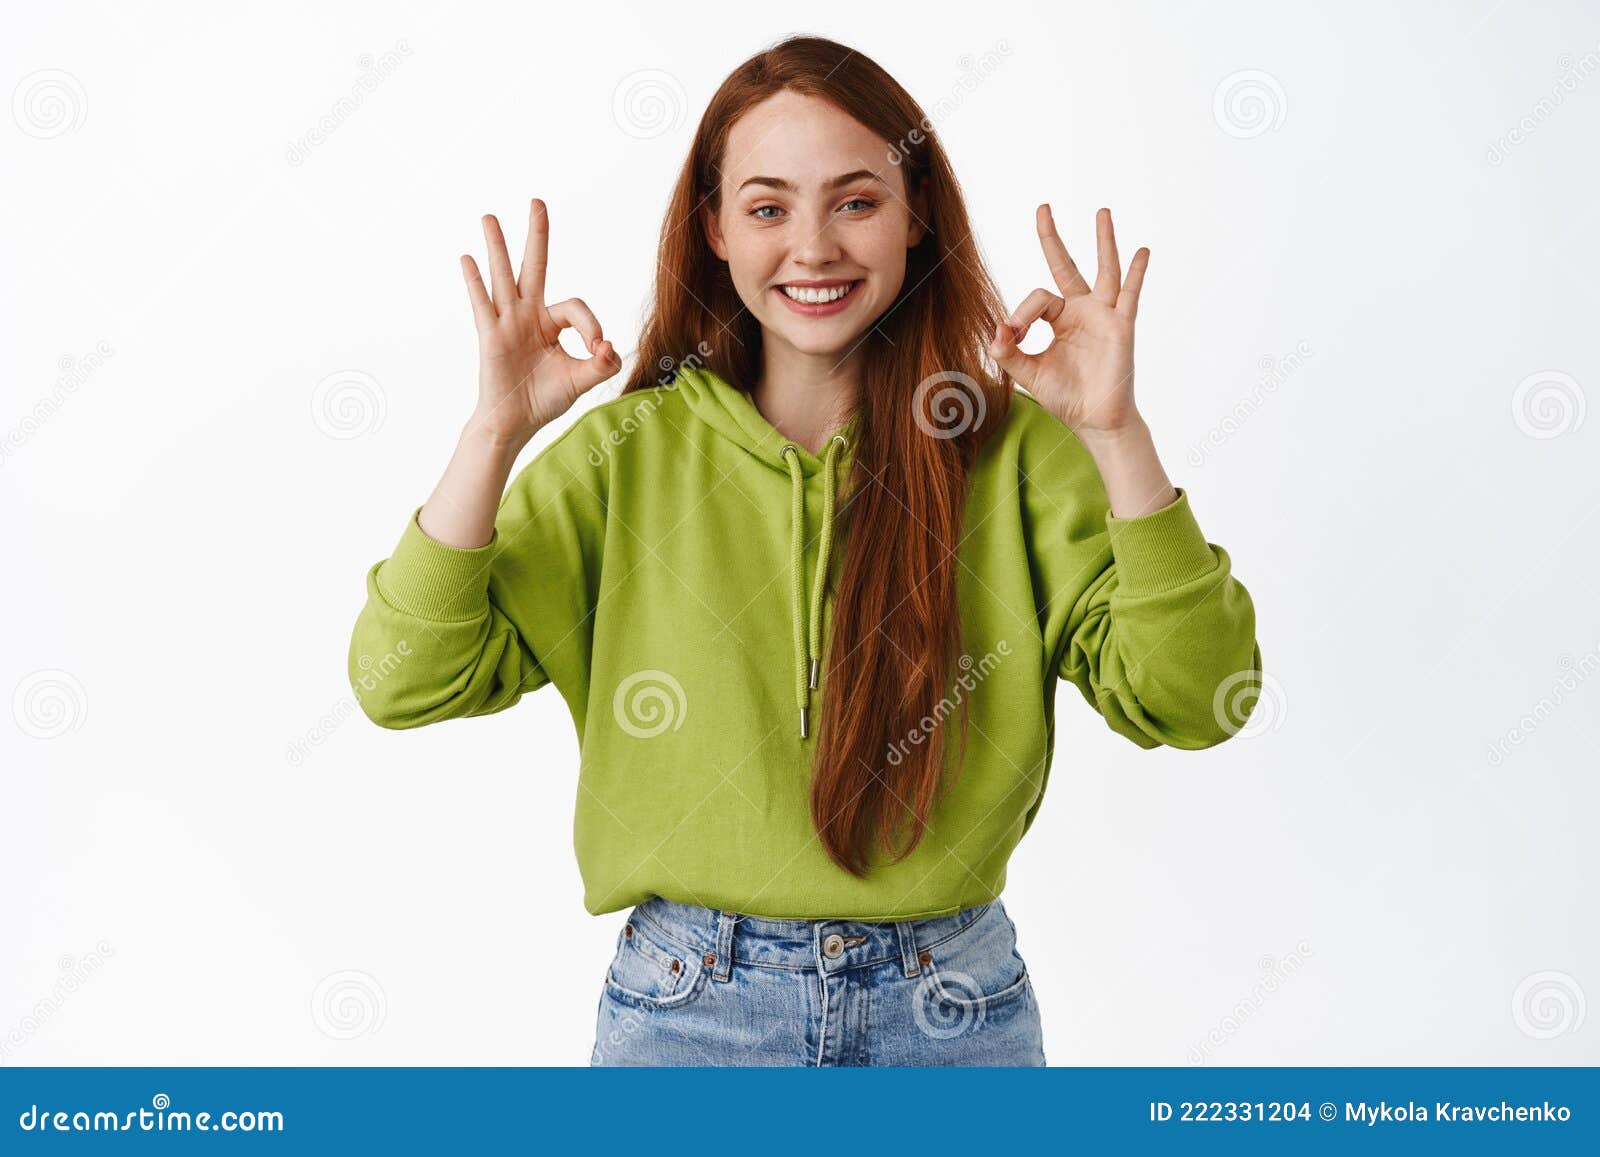 Perfect Smiling Pleased Redhead Girl Shows Okay Ok Sign Nod In 